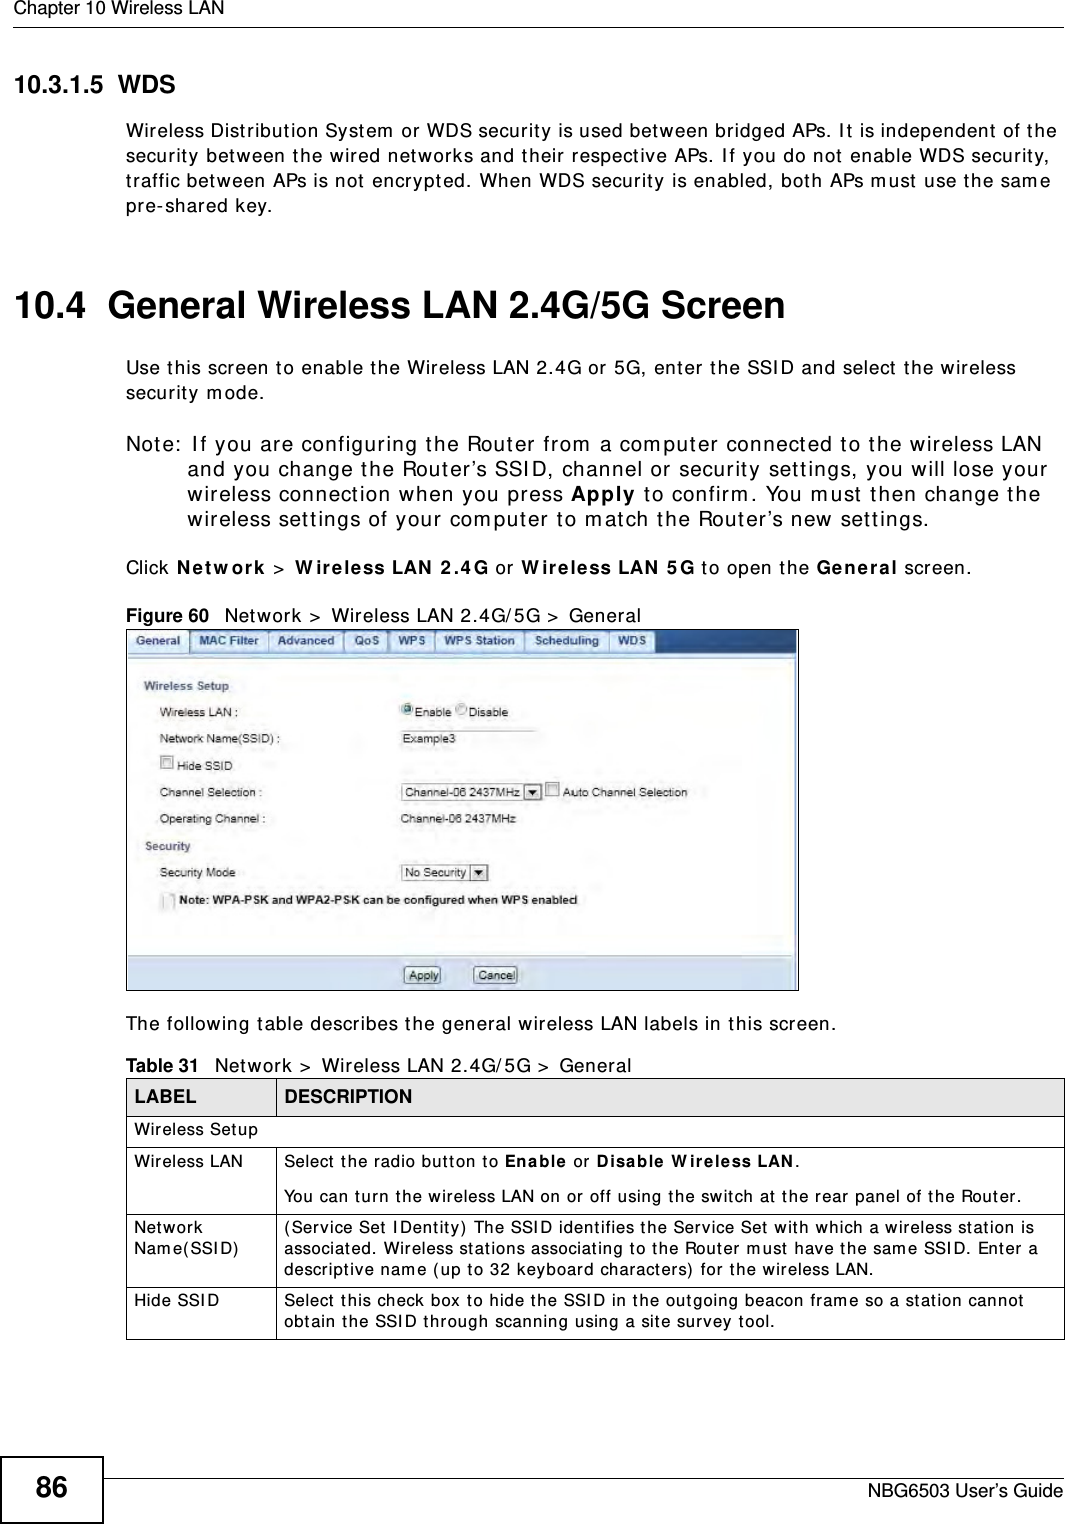 Chapter 10 Wireless LANNBG6503 User’s Guide8610.3.1.5  WDSWireless Distribution System or WDS security is used between bridged APs. It is independent of the security between the wired networks and their respective APs. If you do not enable WDS security, traffic between APs is not encrypted. When WDS security is enabled, both APs must use the same pre-shared key.10.4  General Wireless LAN 2.4G/5G Screen Use this screen to enable the Wireless LAN 2.4G or 5G, enter the SSID and select the wireless security mode.Note: If you are configuring the Router from a computer connected to the wireless LAN and you change the Router’s SSID, channel or security settings, you will lose your wireless connection when you press Apply to confirm. You must then change the wireless settings of your computer to match the Router’s new settings.Click Network &gt; Wireless LAN 2.4G or Wireless LAN 5G to open the General screen.Figure 60   Network &gt; Wireless LAN 2.4G/5G &gt; General The following table describes the general wireless LAN labels in this screen.Table 31   Network &gt; Wireless LAN 2.4G/5G &gt; GeneralLABEL DESCRIPTIONWireless SetupWireless LAN Select the radio button to Enable or Disable Wireless LAN.You can turn the wireless LAN on or off using the switch at the rear panel of the Router.Network Name(SSID) (Service Set IDentity) The SSID identifies the Service Set with which a wireless station is associated. Wireless stations associating to the Router must have the same SSID. Enter a descriptive name (up to 32 keyboard characters) for the wireless LAN. Hide SSID Select this check box to hide the SSID in the outgoing beacon frame so a station cannot obtain the SSID through scanning using a site survey tool.